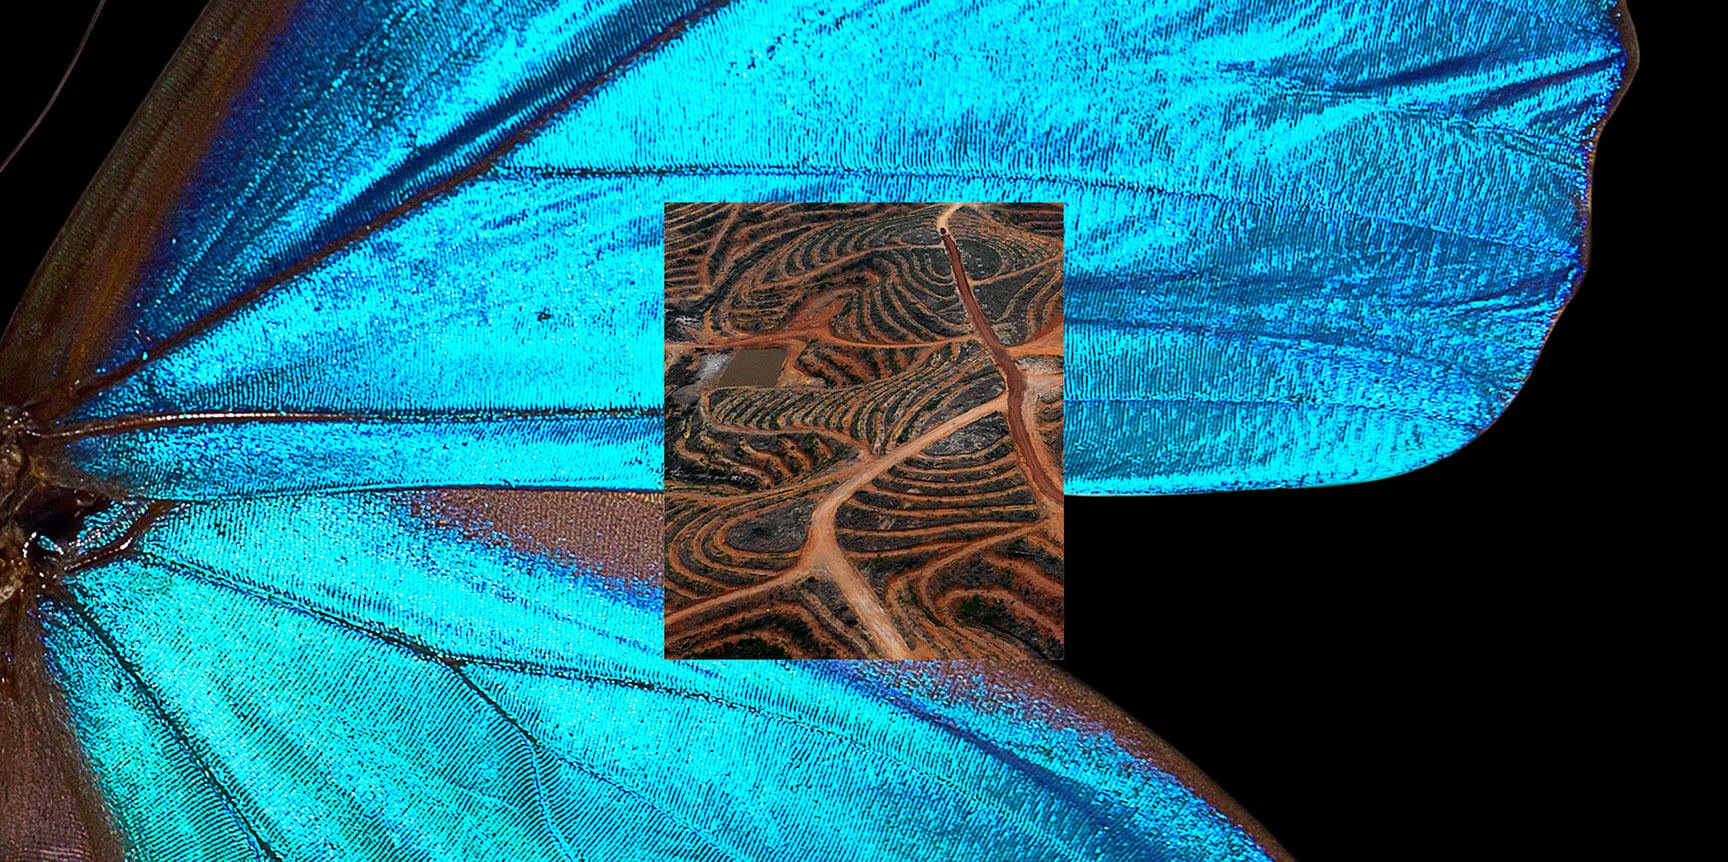 Key visual of the first exhibition at extract. Shown is a blue butterfly wing and an arid landscape.